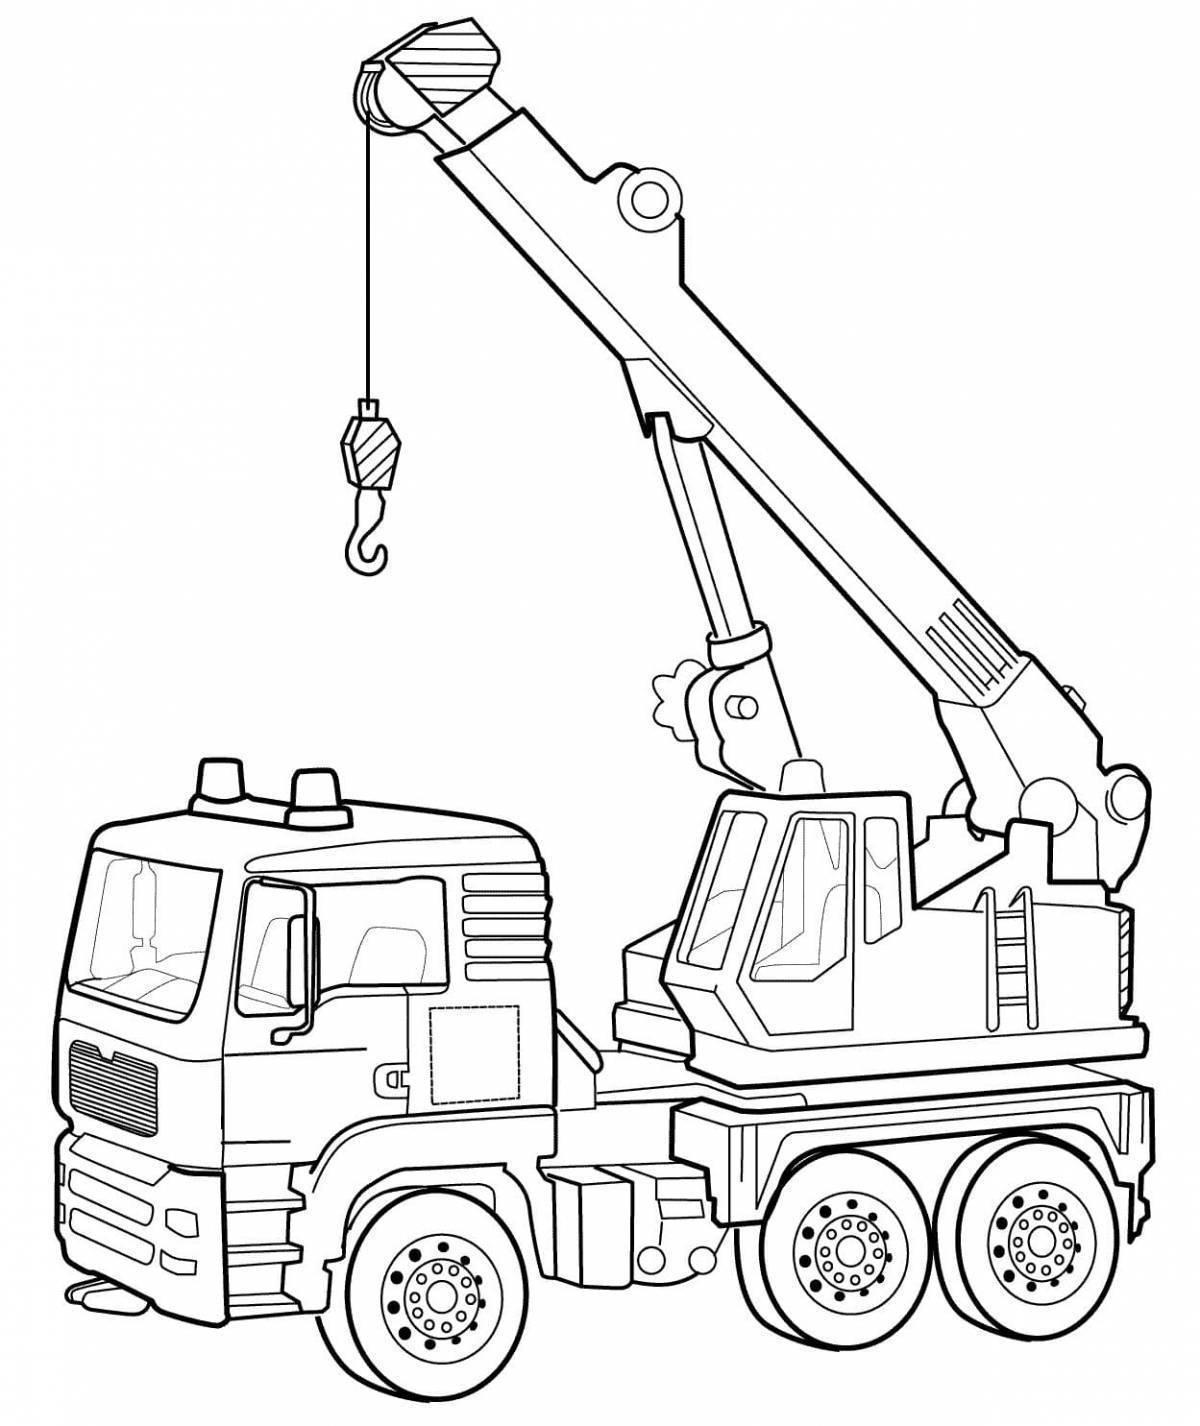 Exciting construction vehicle coloring pages